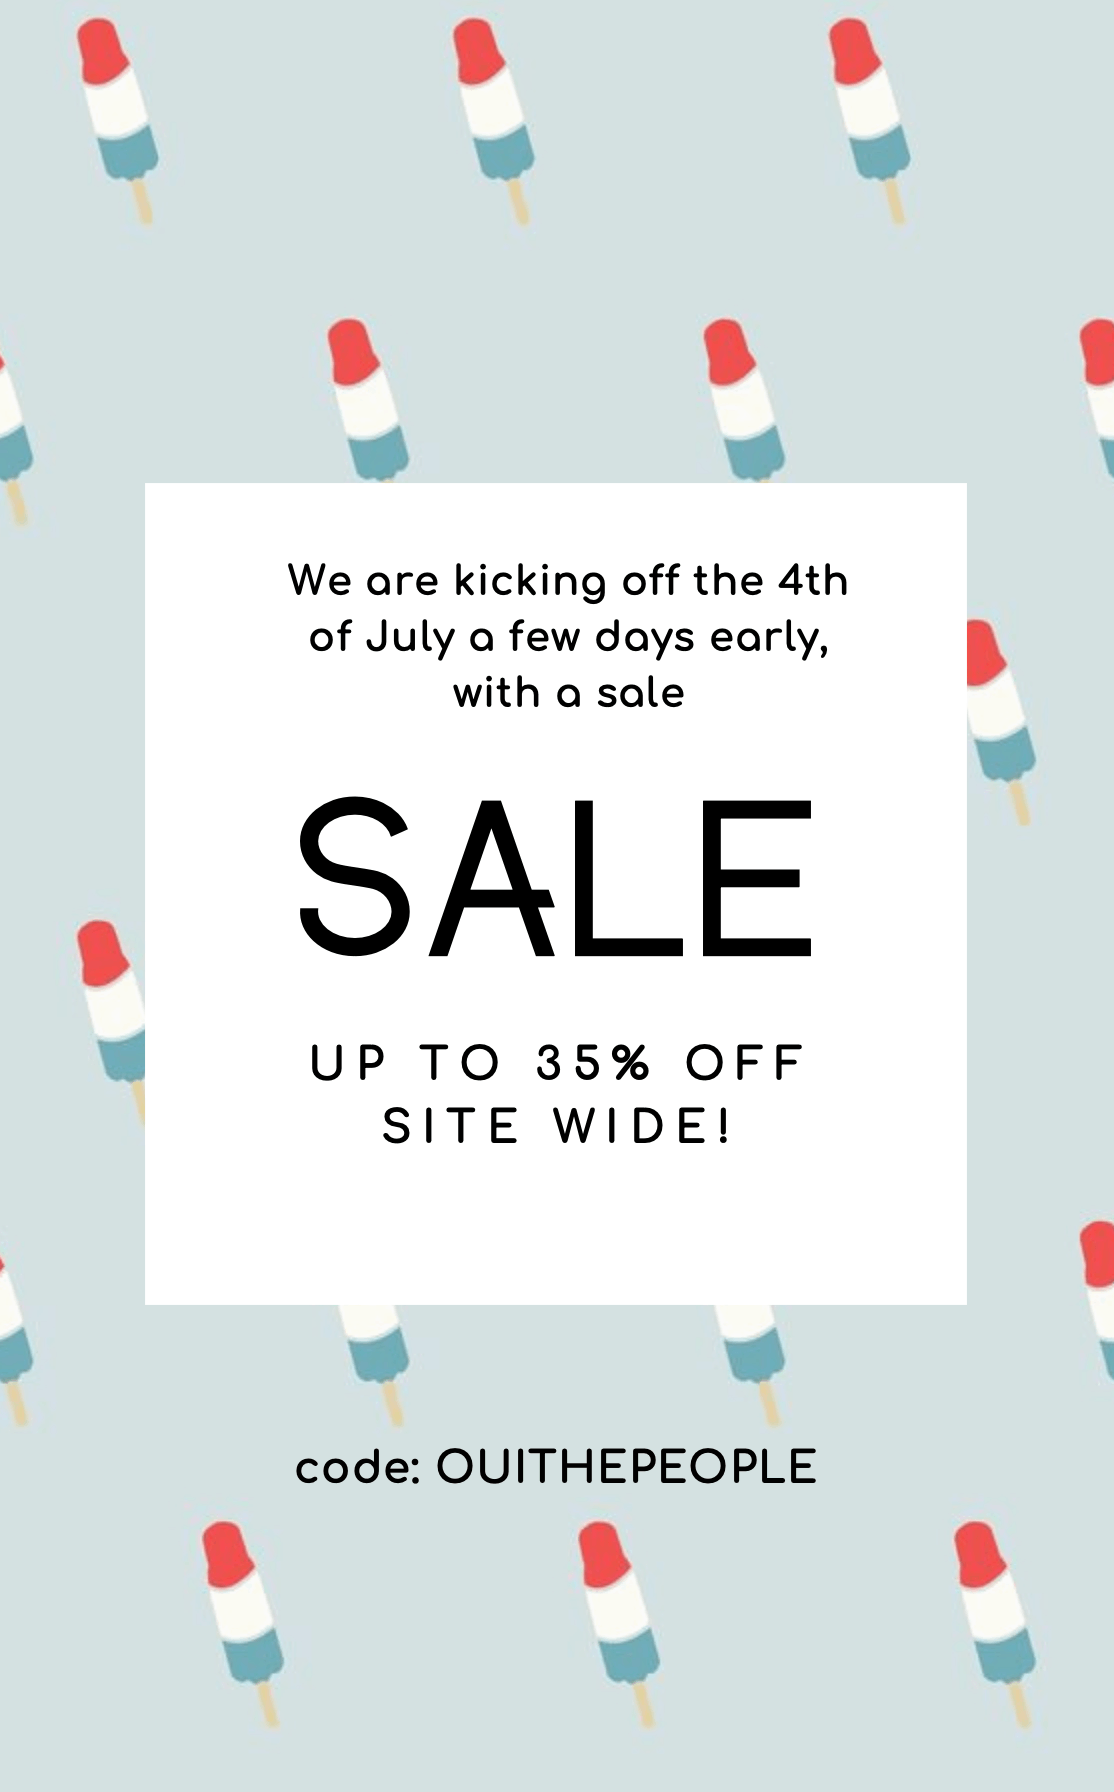 Oui Please 4th of July Coupon Code – 35% Off Sitewide!